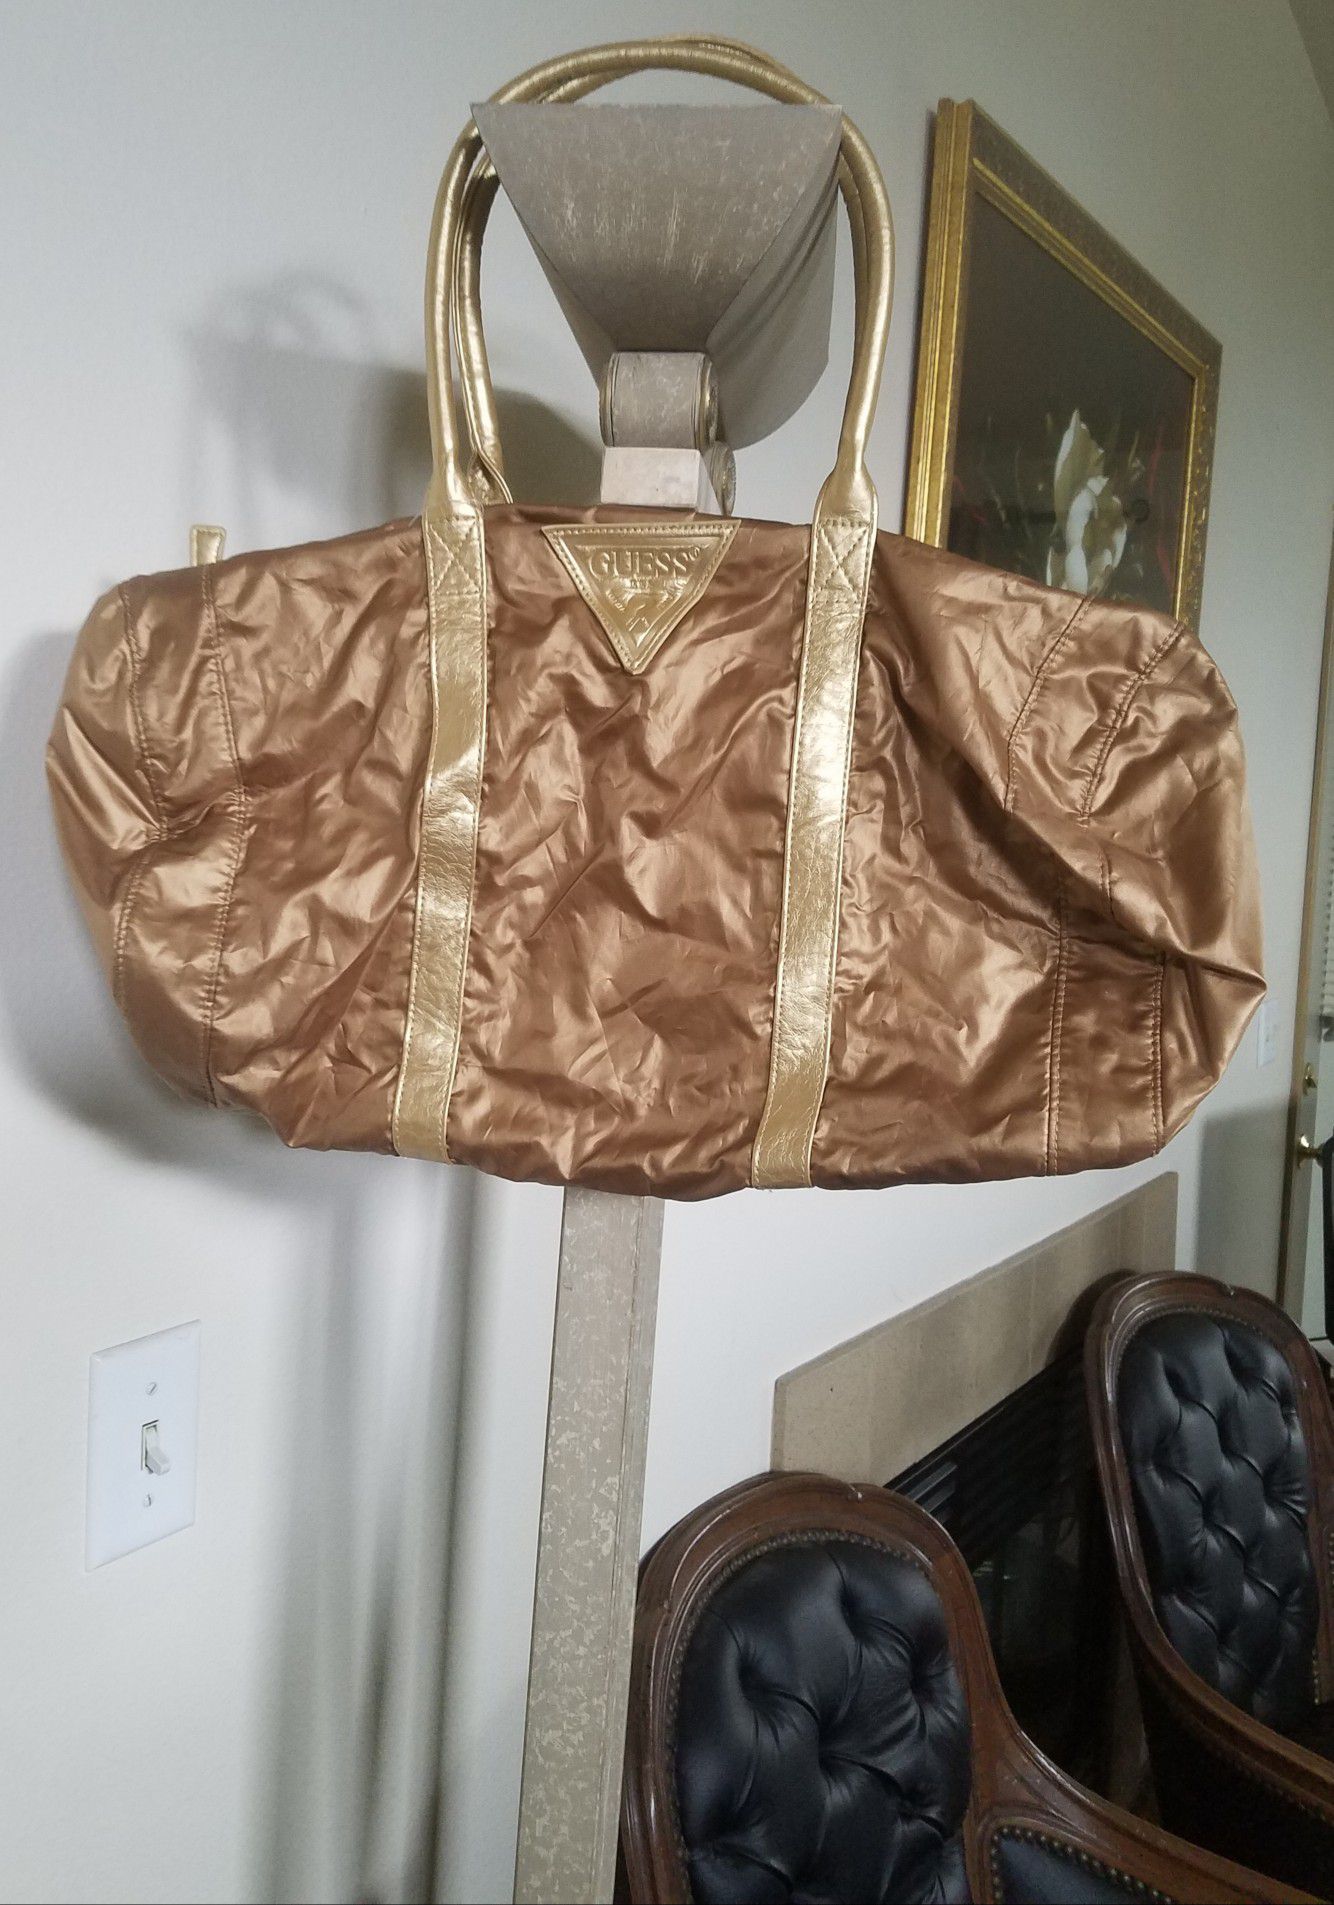 Guess Women's Athletic Bag